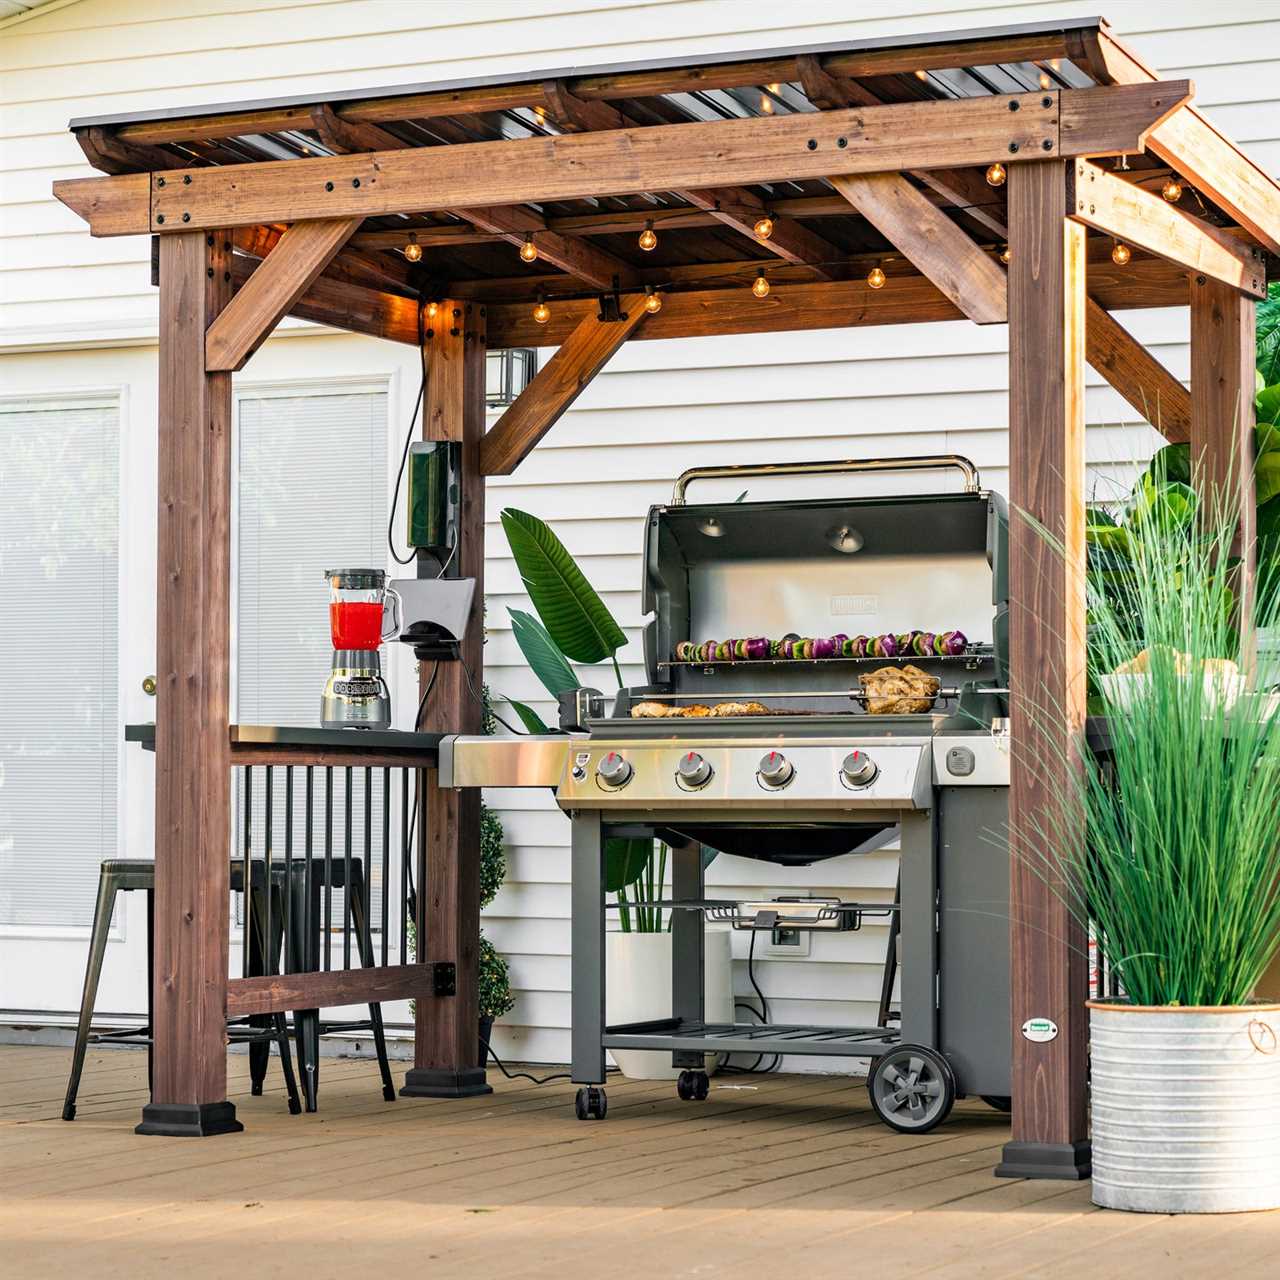 Section 2: Enhancing Your Backyard with Functional Elements